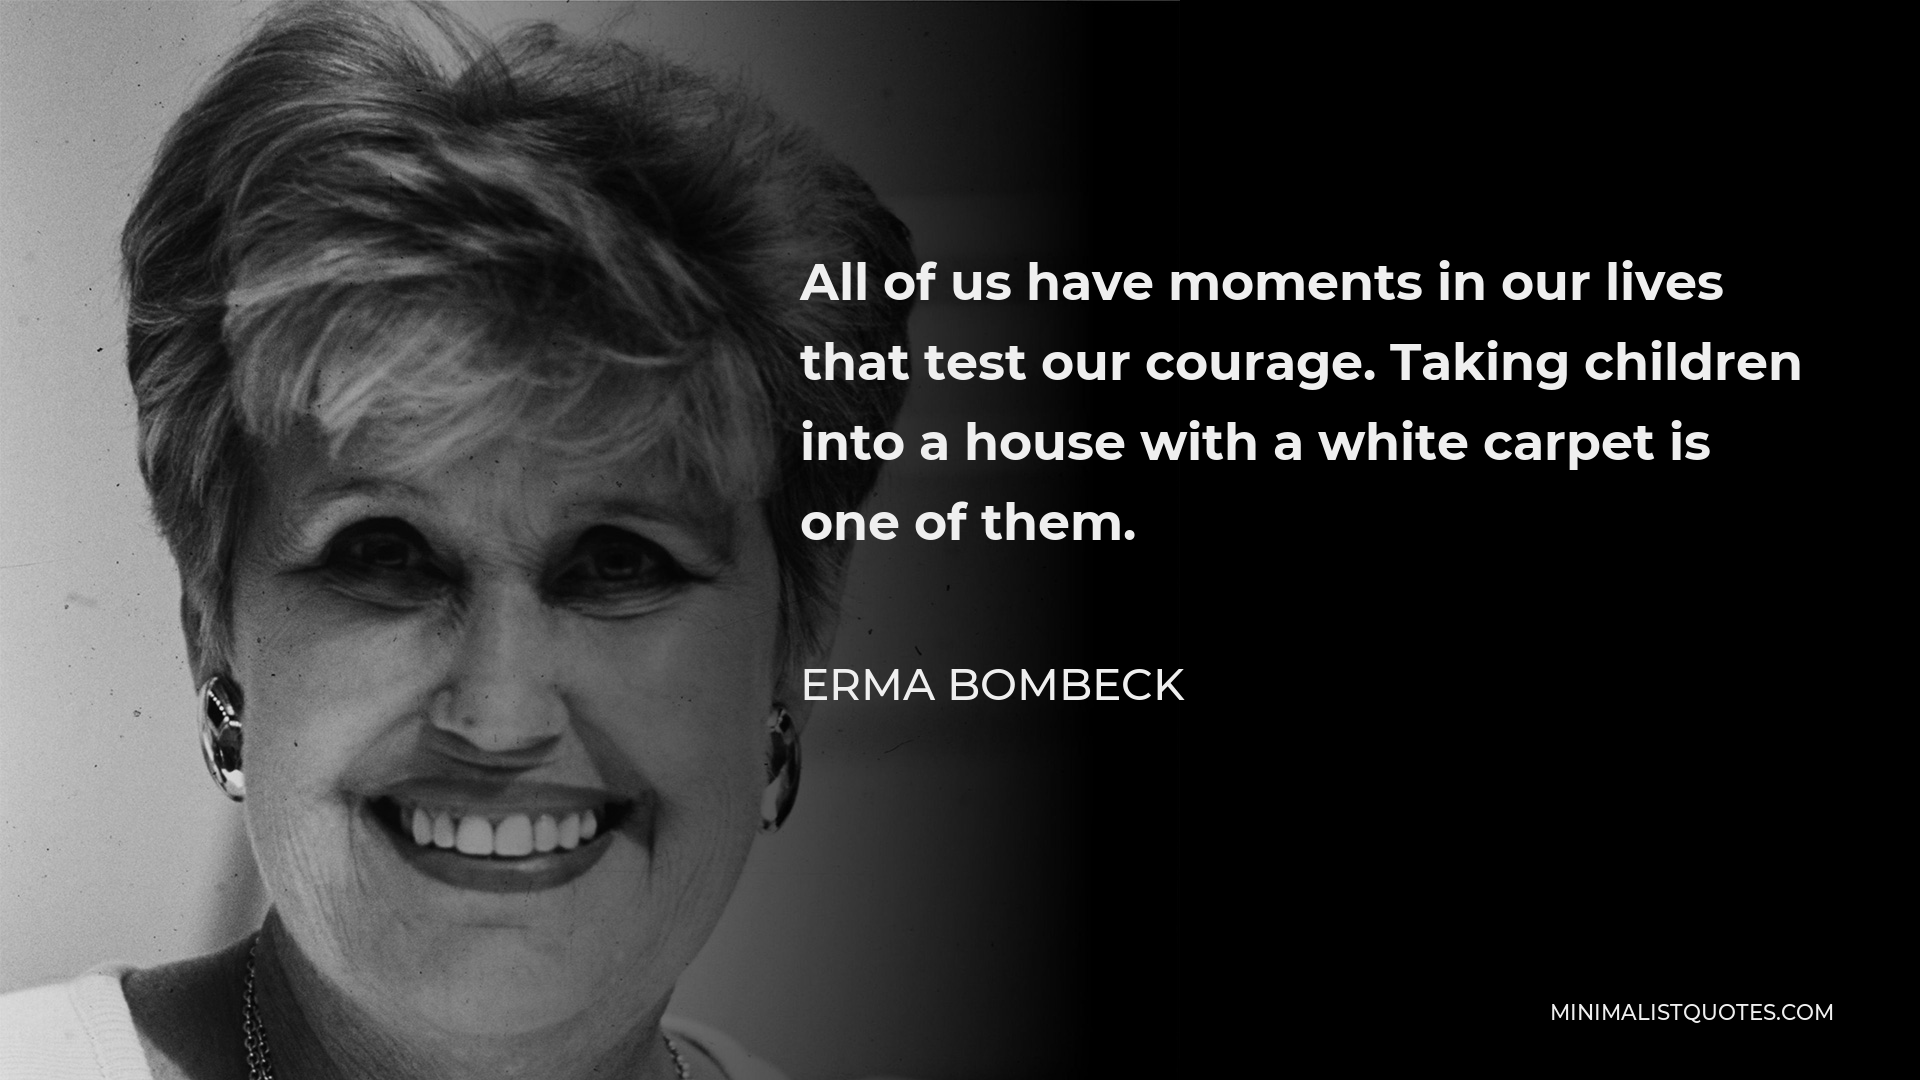 Erma Bombeck Quote - All of us have moments in our lives that test our courage. Taking children into a house with a white carpet is one of them.